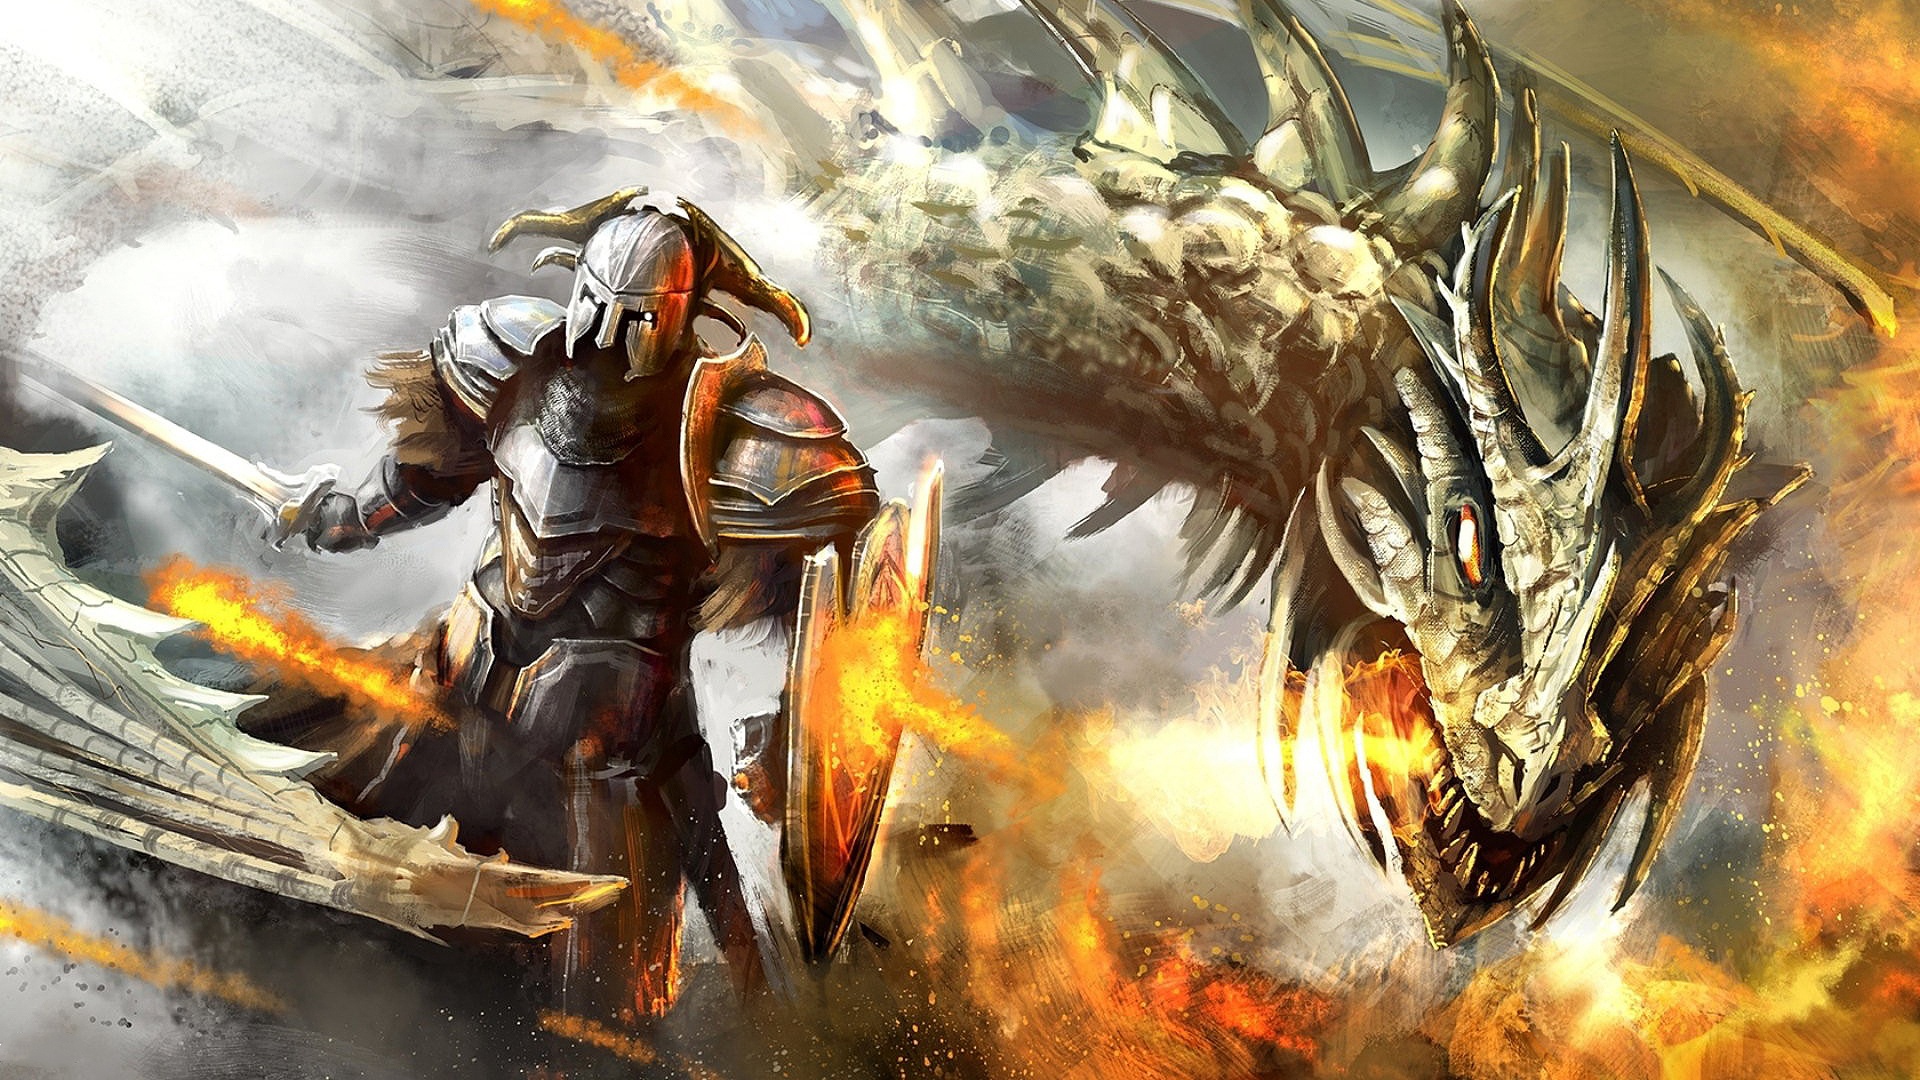 dragon knight wallpaper,action adventure game,cg artwork,pc game,strategy video game,warlord